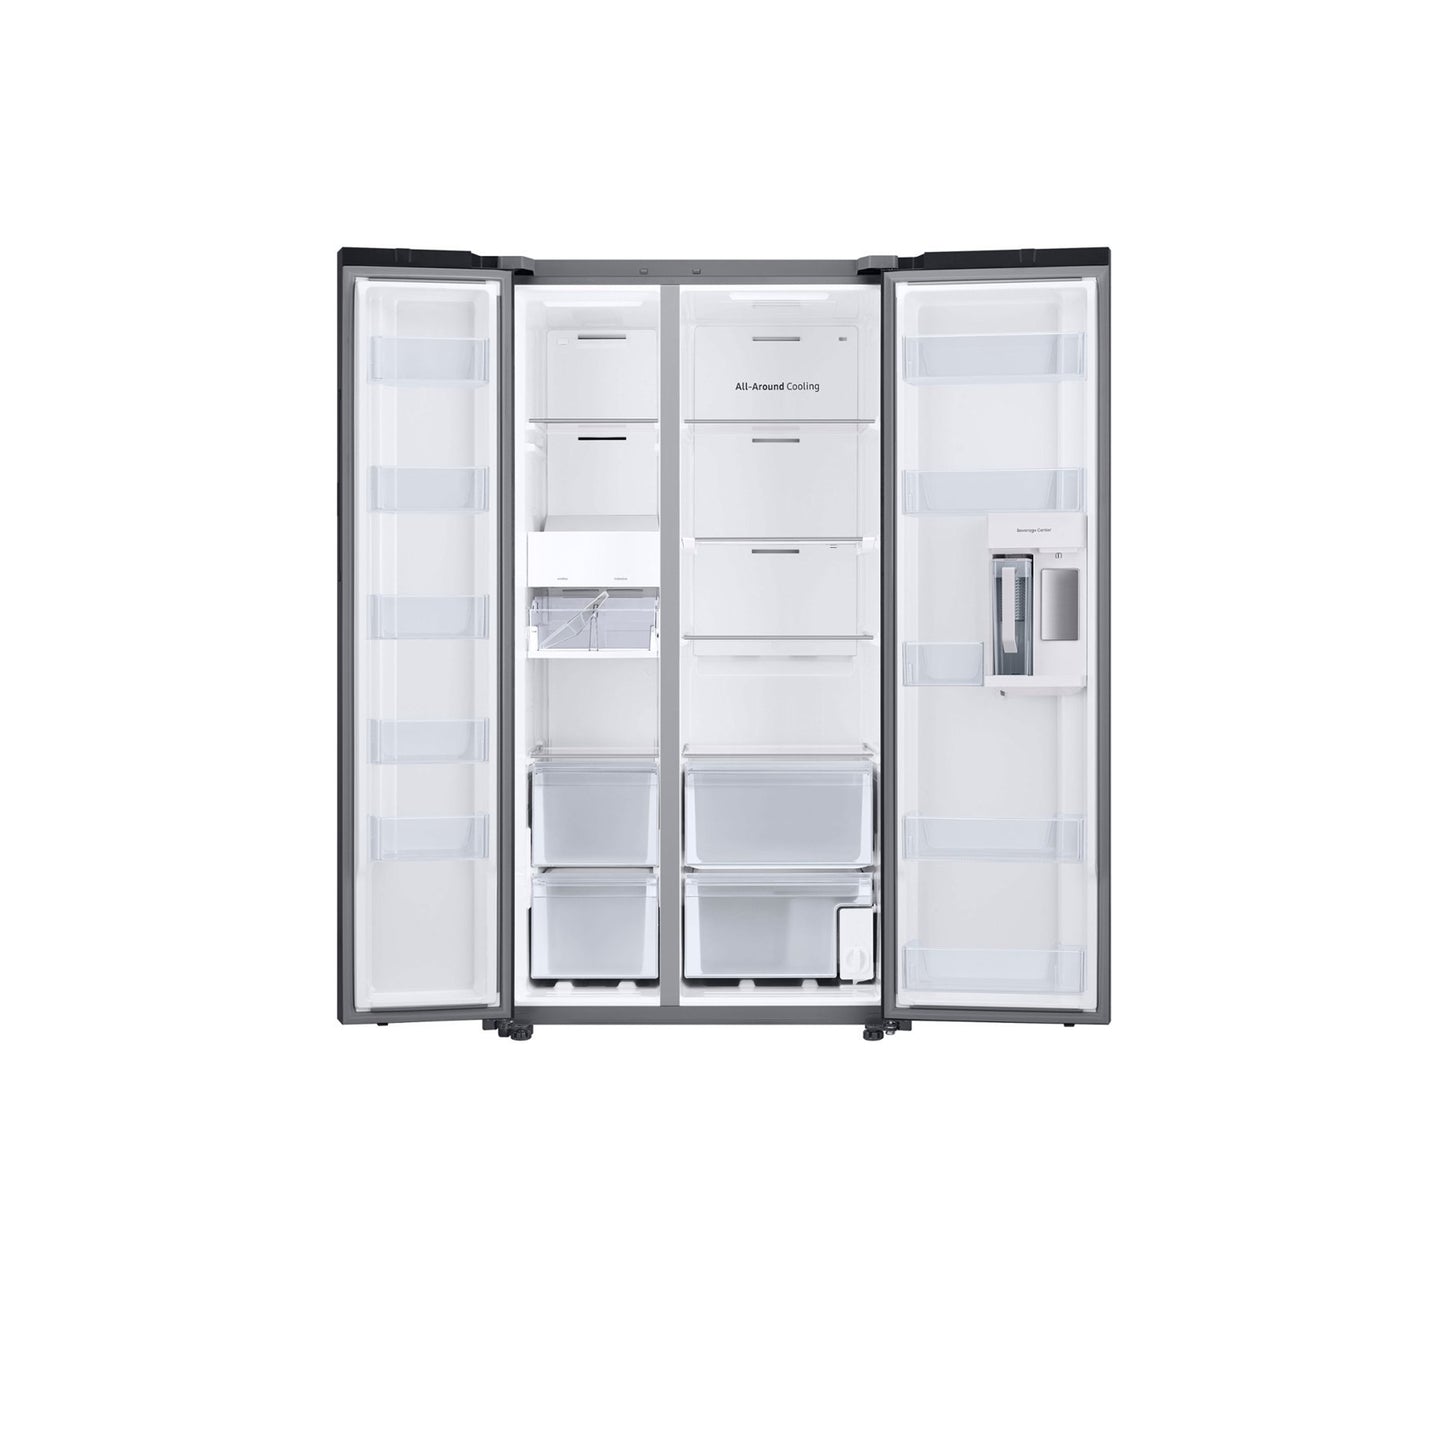 Bespoke Side-by-Side 28 cu. ft. Refrigerator with Beverage Center™ in White Glass.